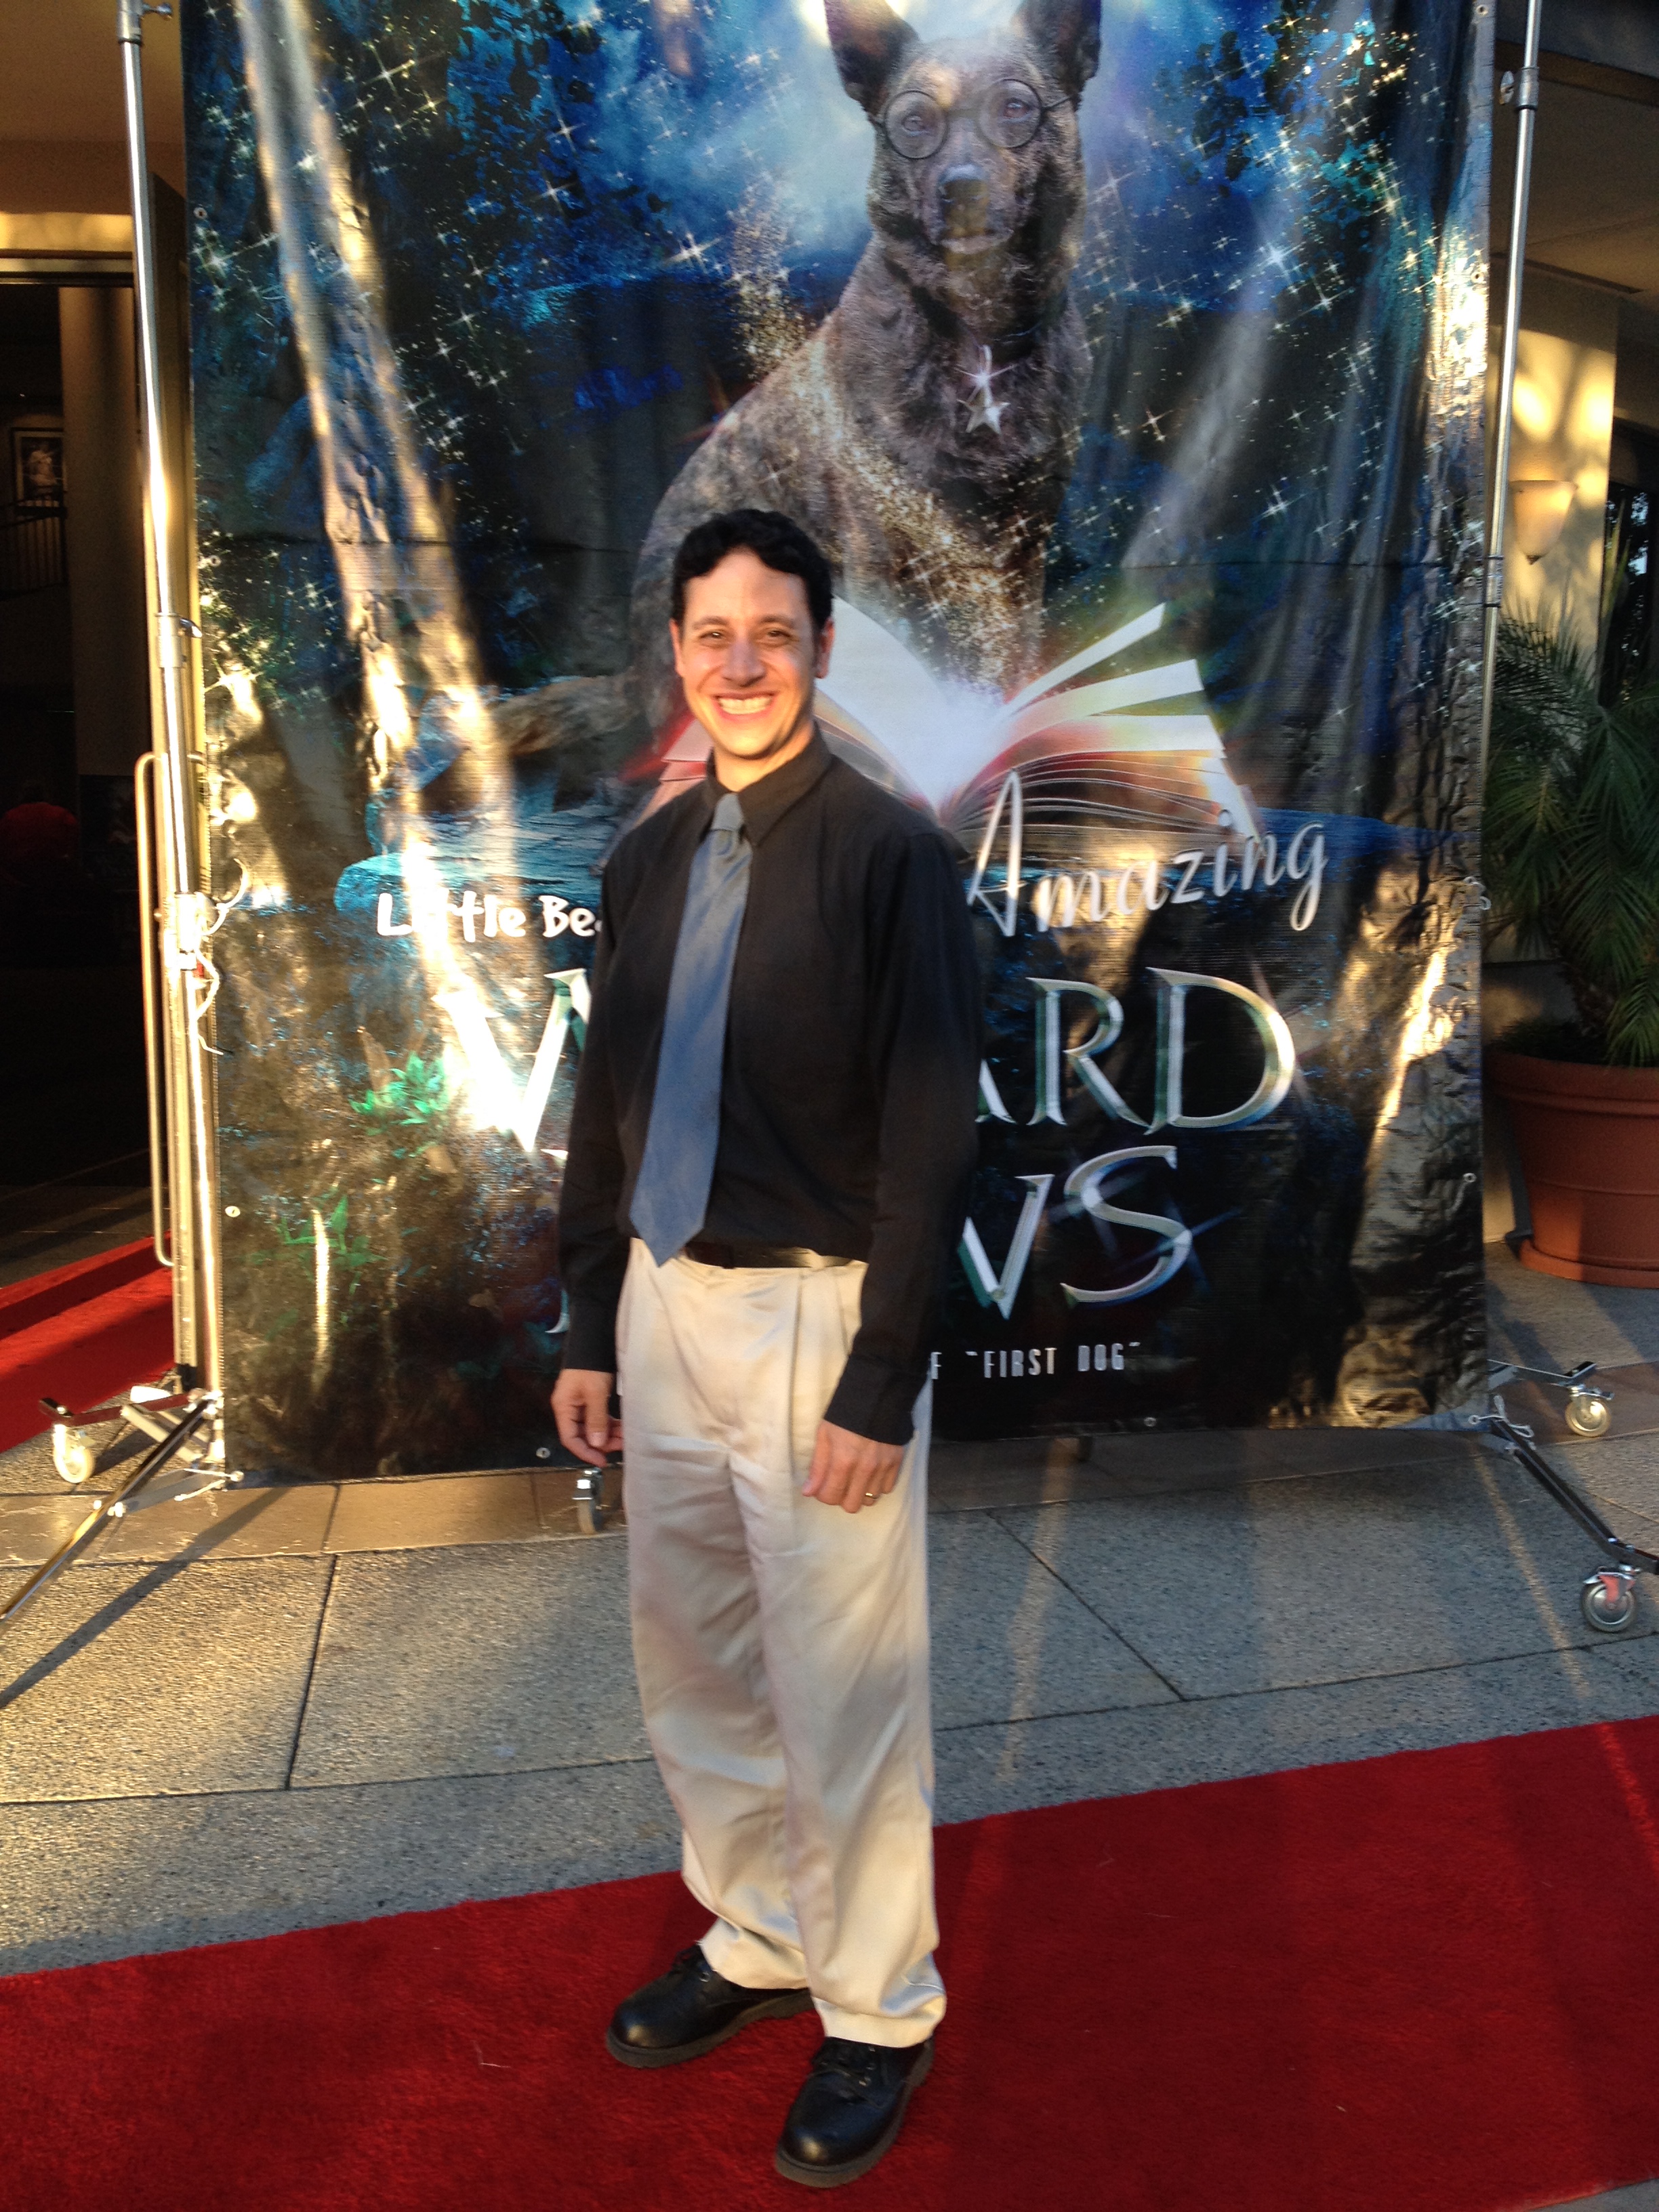 The Amazing Wizard of Paws Premiere 8-13-2014 Chris Spinelli